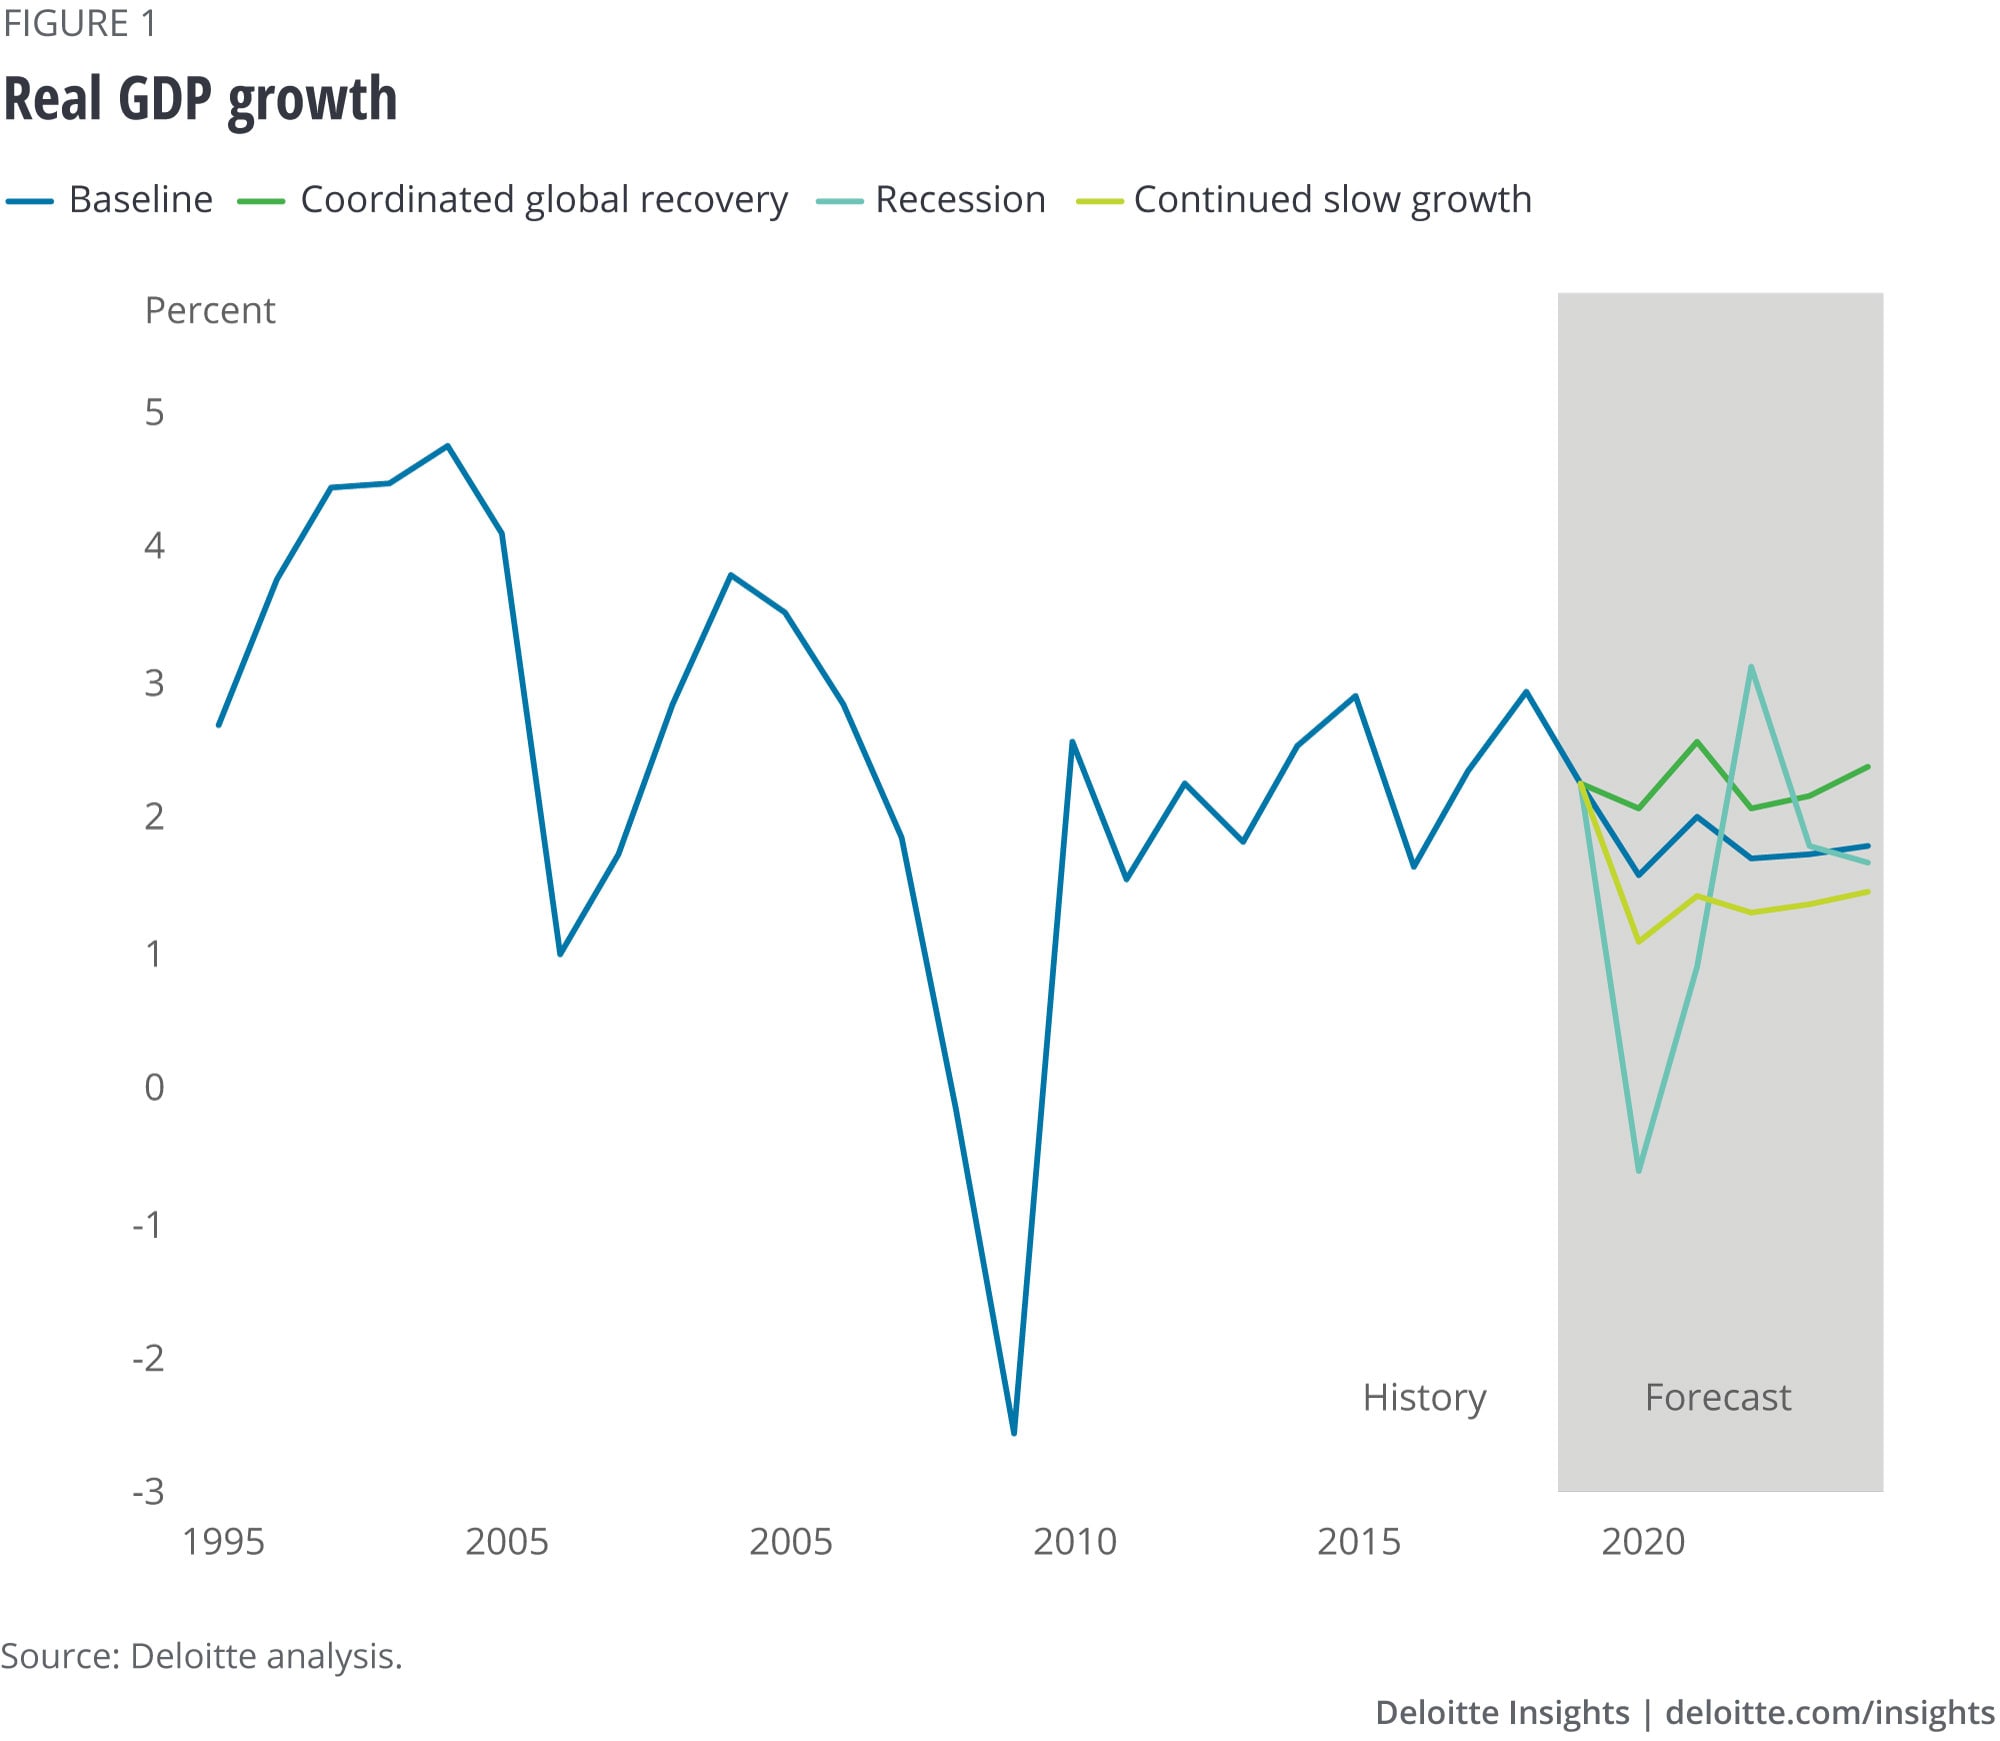 Real GDP growth